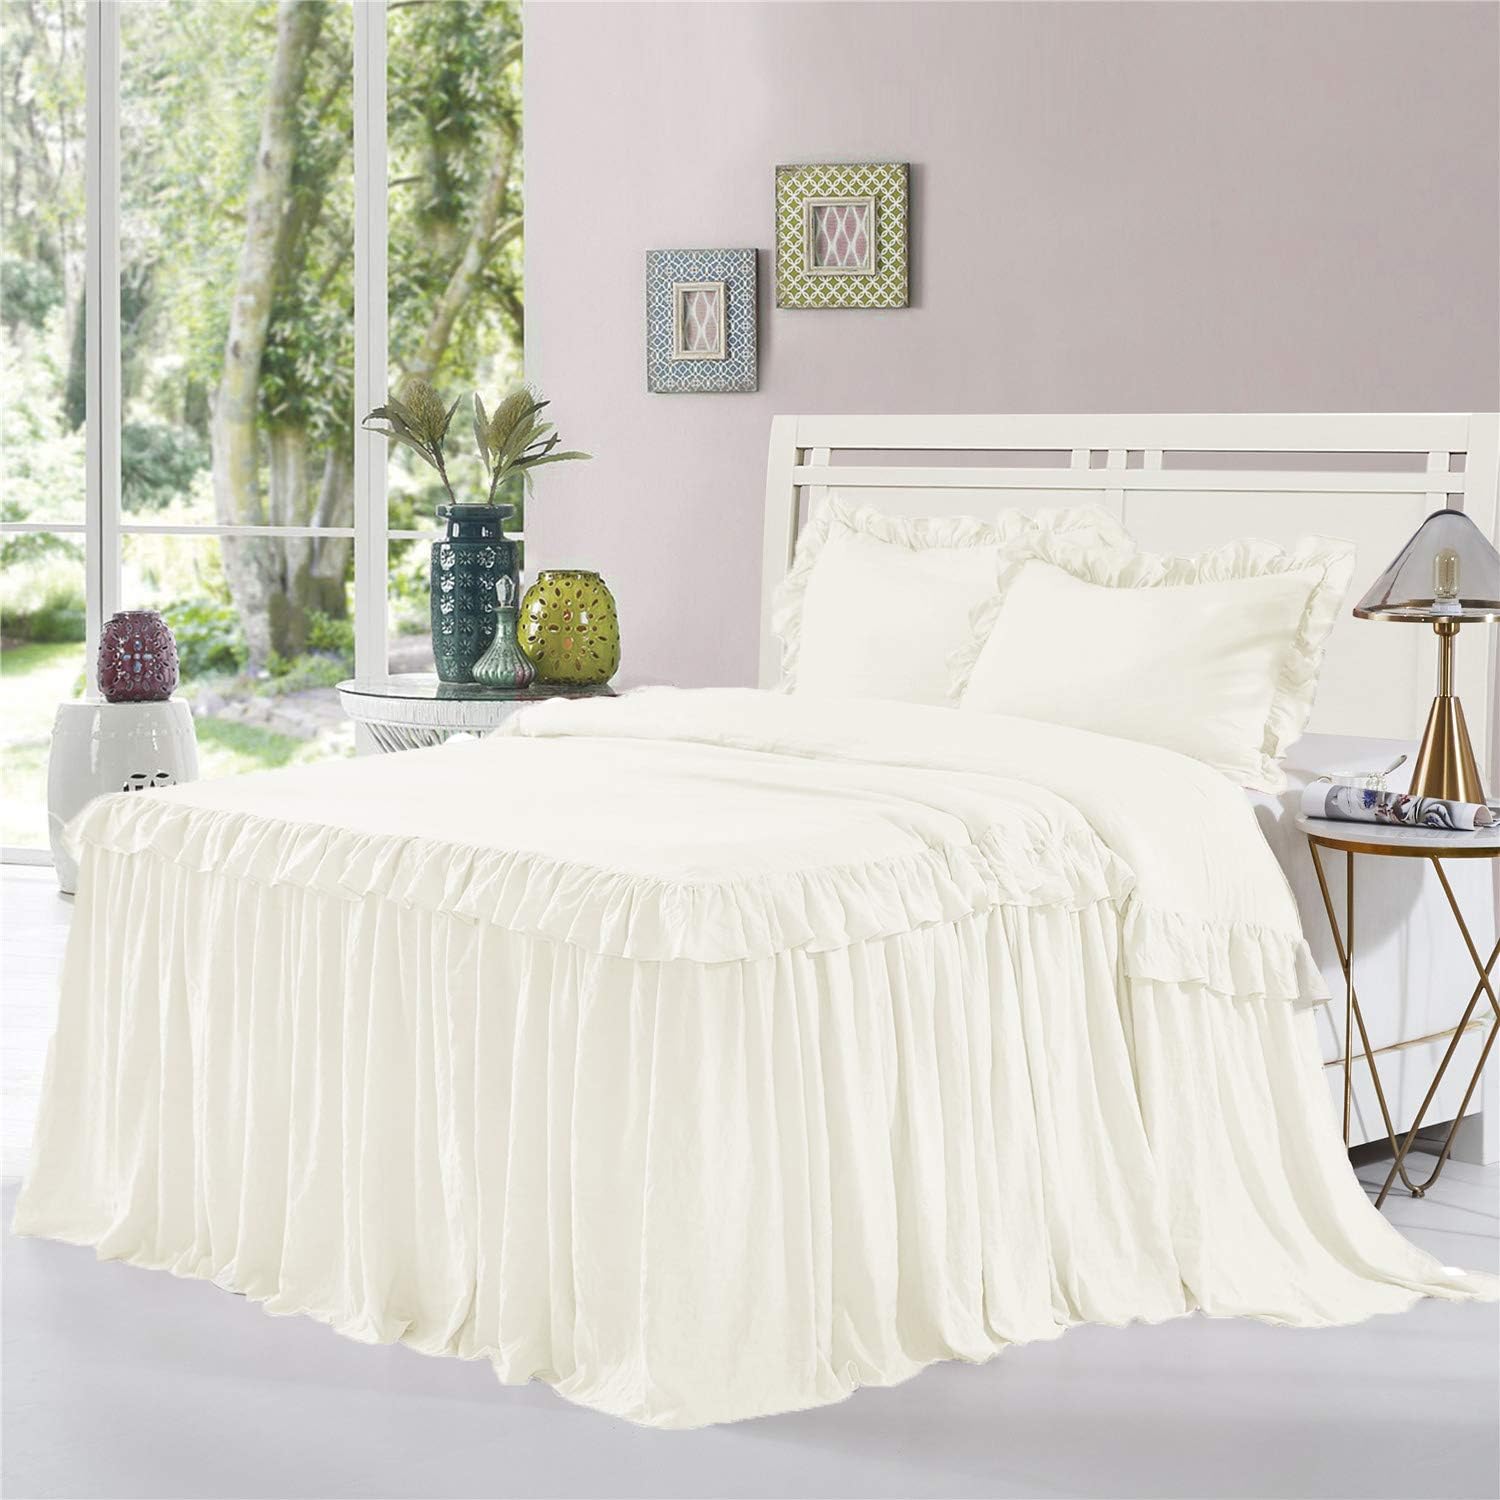 HIG 3 Piece Ruffle Skirt Bedspread Set King - White 30 inches Drop